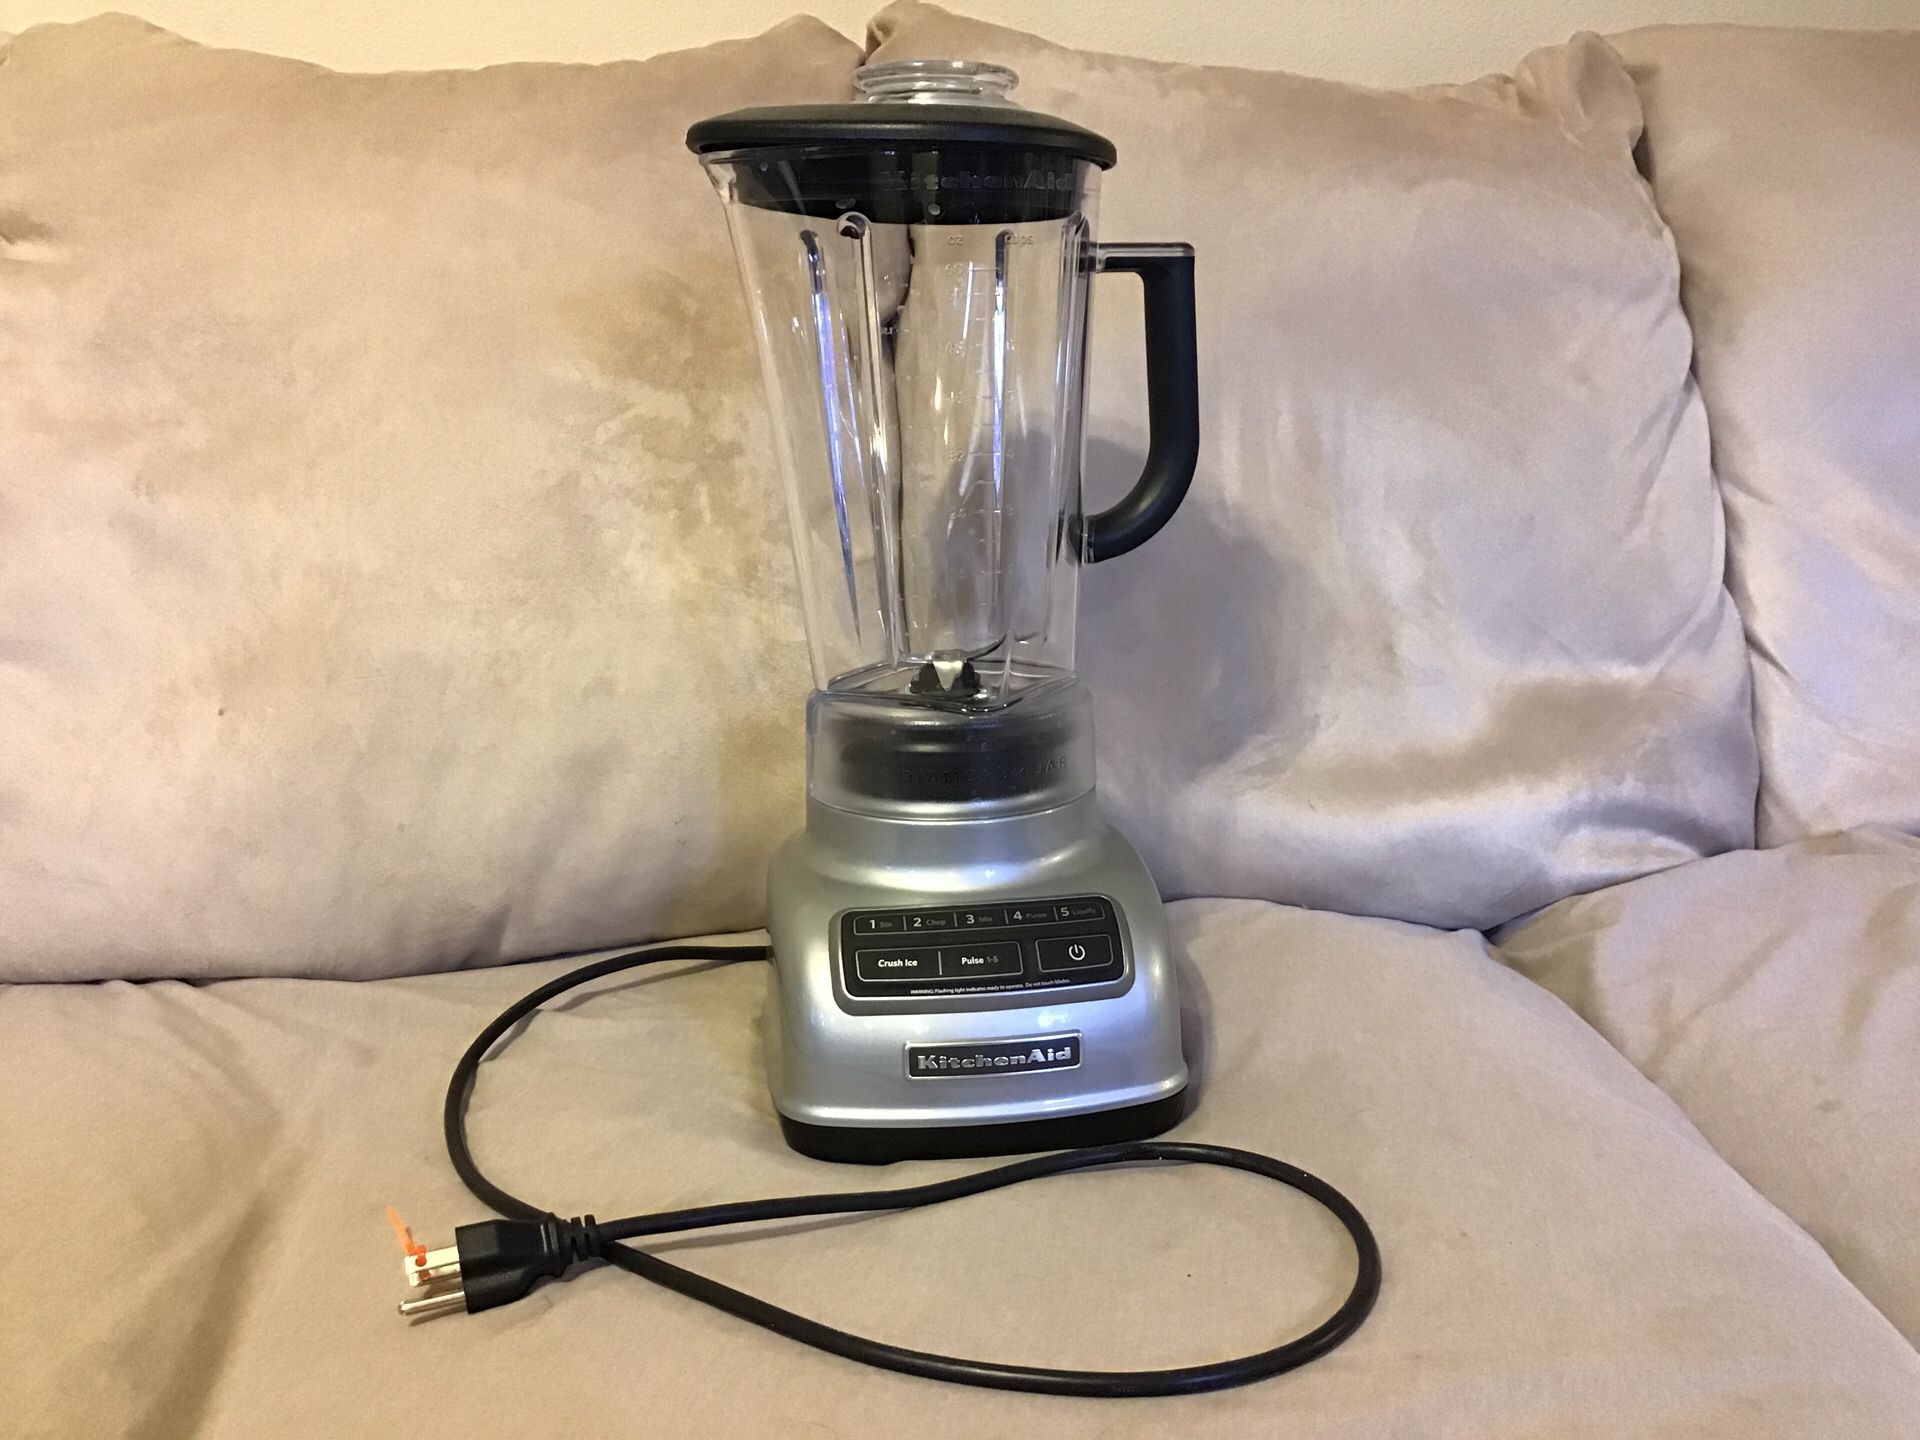 Kitchen aid blender brand new never been used